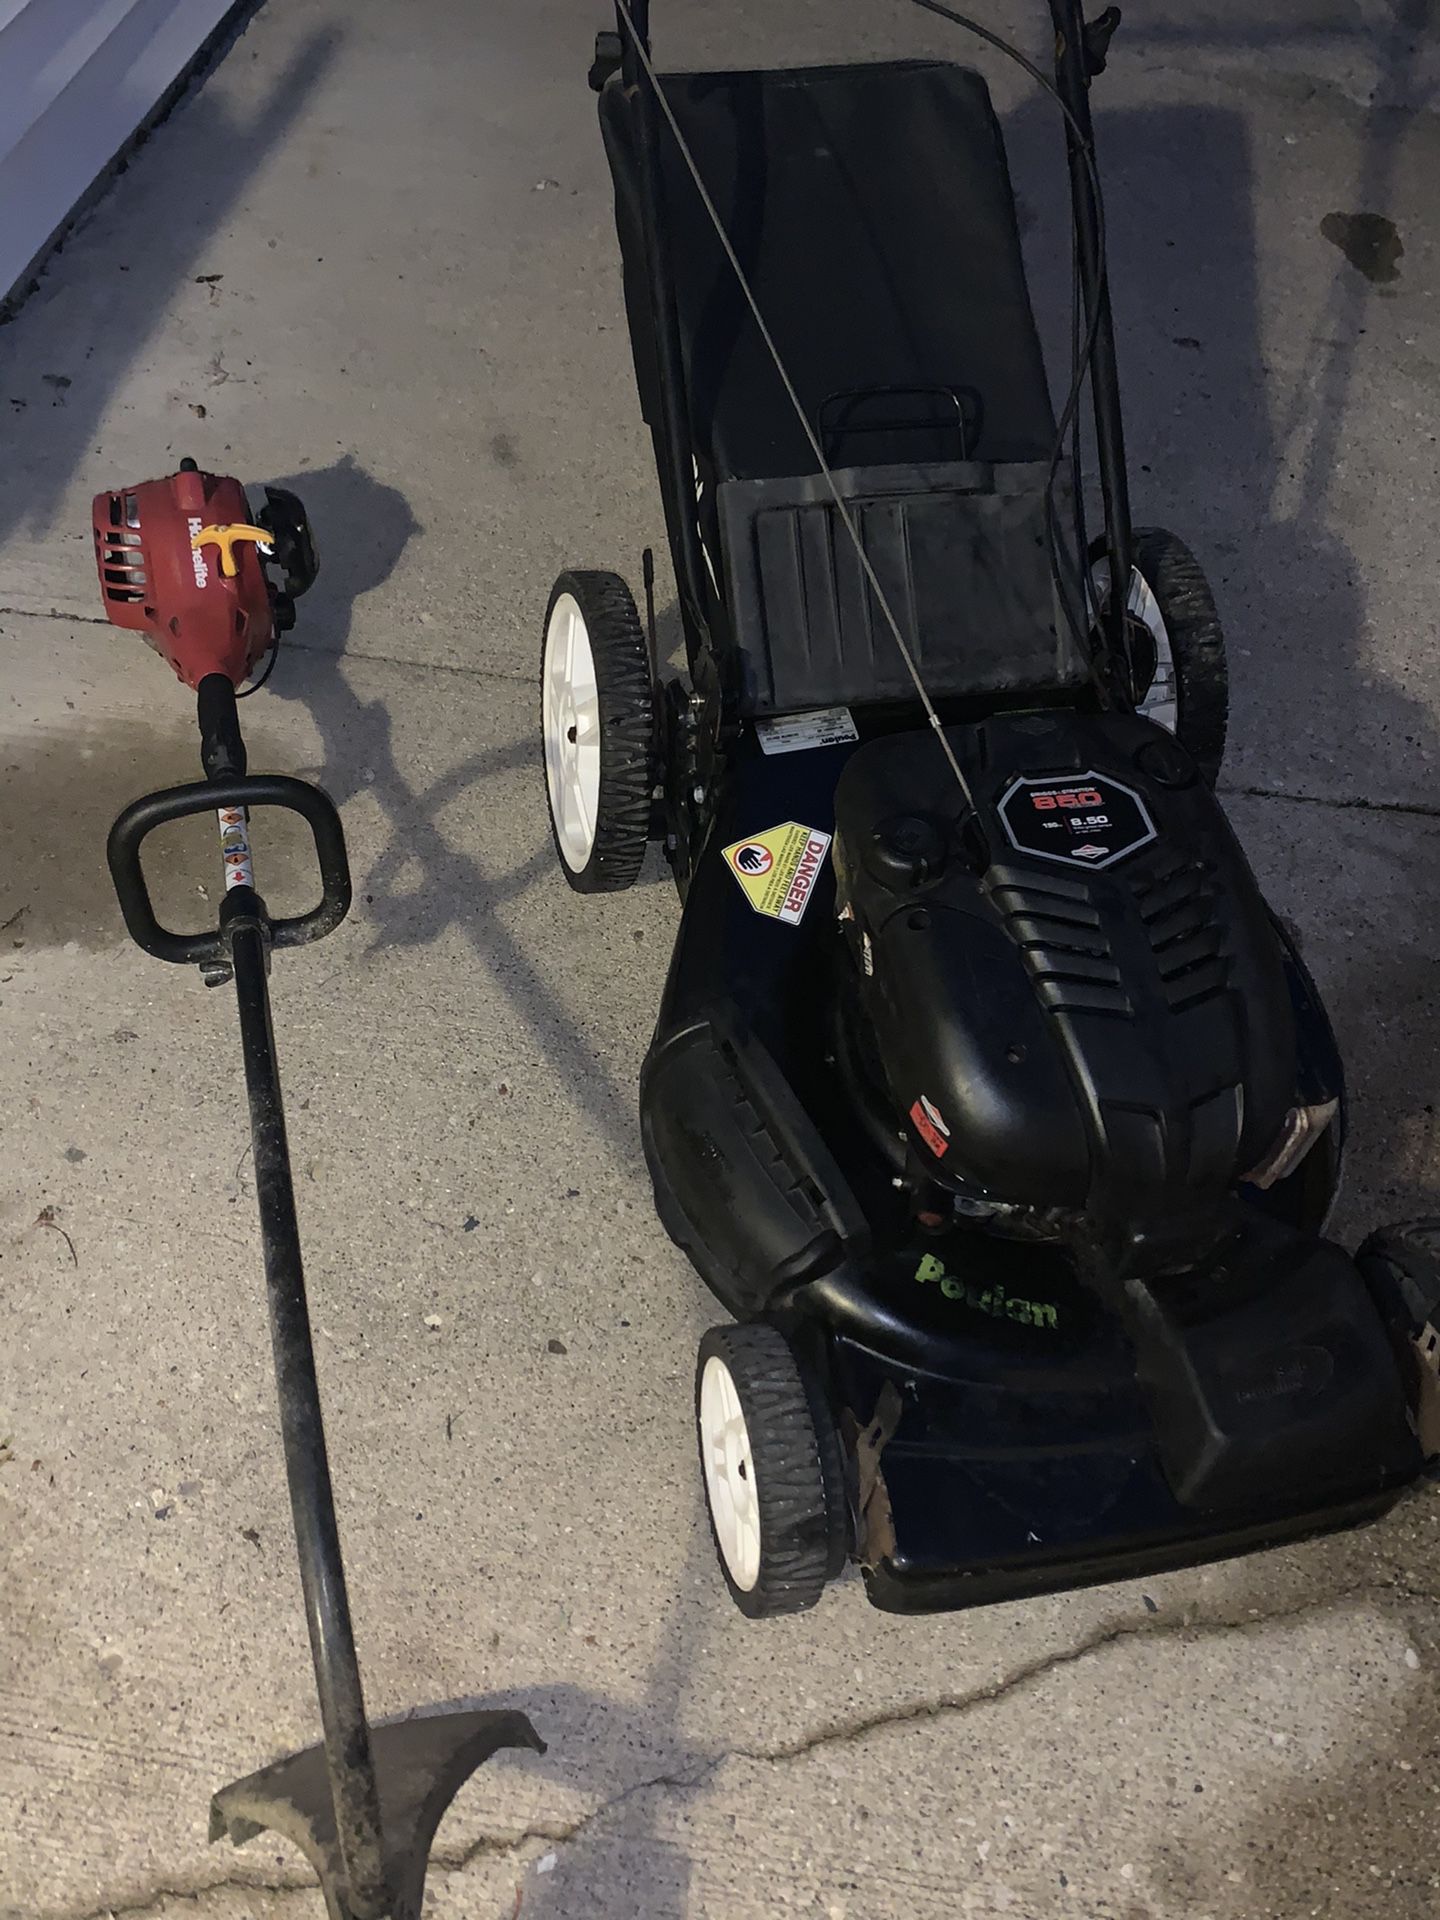 Lawnmower and weed eater